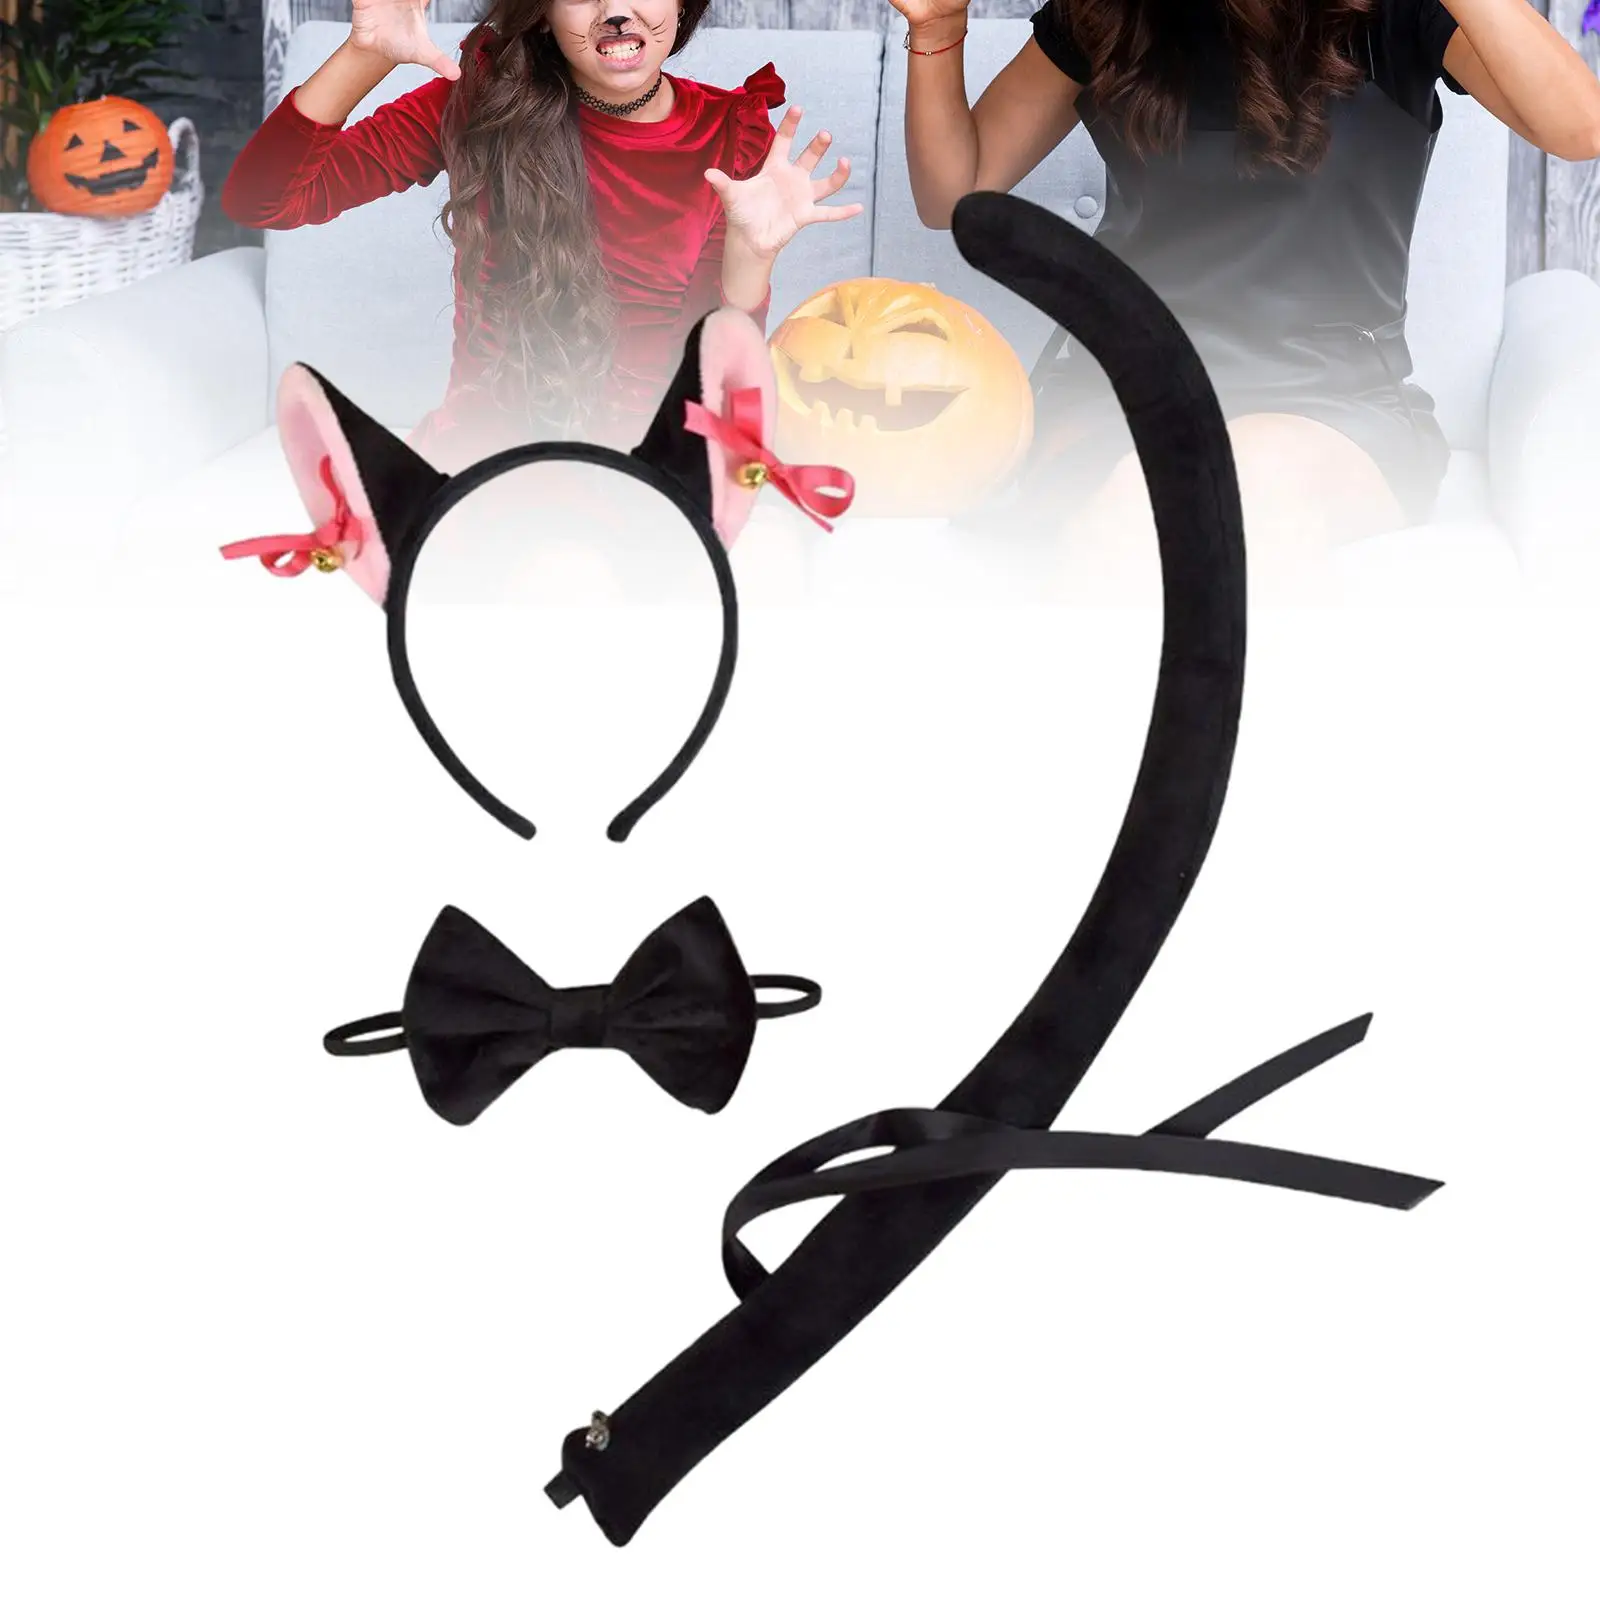 Kids Cat Ears, Bow Tie and Tail Set Makeup Props Animal Costume Set for Themed Party Roles Play Performance Birthdays Holidays